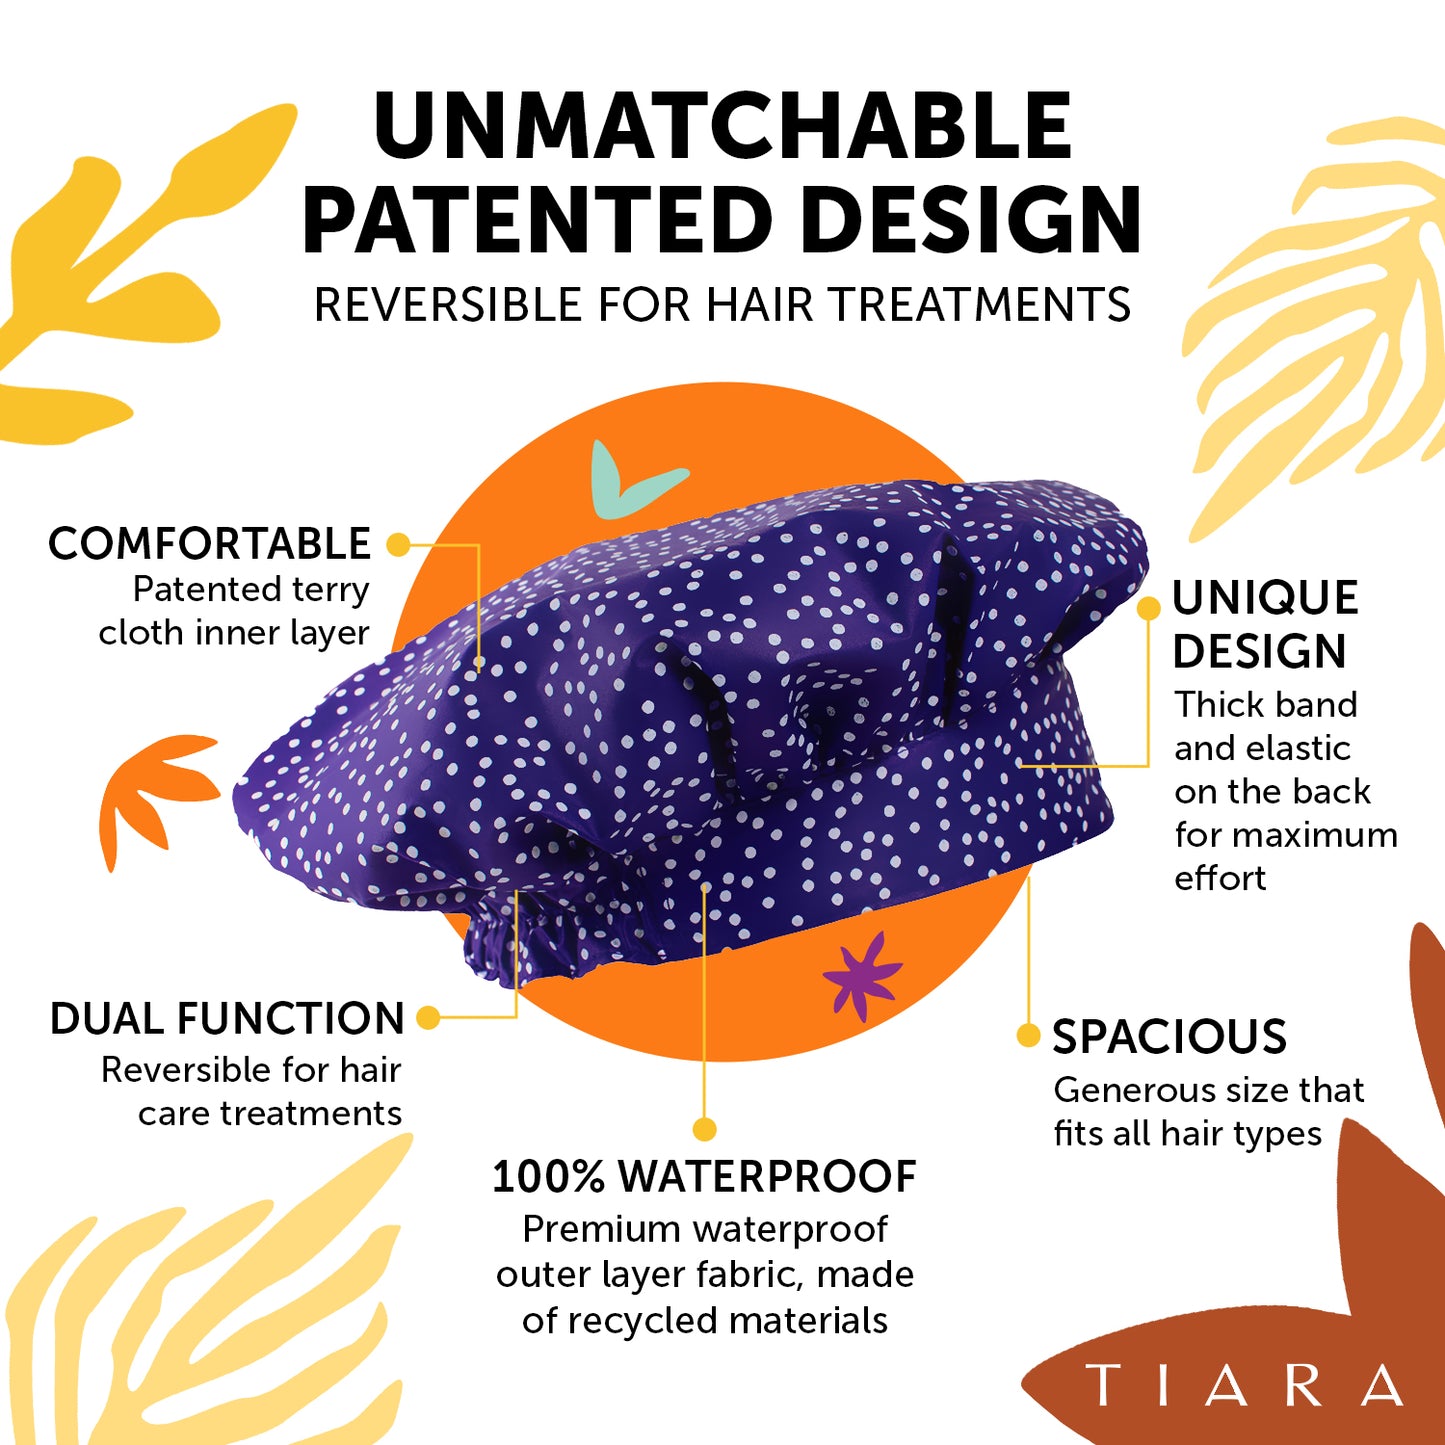 UNMATCHABLE PATENTED DESIGN. REVERSIBLE FOR HAIR TREATMENTS. TIARA SHOWER CAP PAISLEY DESIGN EXPLANATION: COMFORTABLE: PATENTED TERRY CLOTH INNER LAYER. UNIQUE DESIGN : THICK BAND AND ELASTIC ON THE BACK FOR MAXIMUM COMFORT. SPACIOUS: GENEROUS SIZE THAT FITS ALL HAIR TYPES 100% WATERPROOF. 